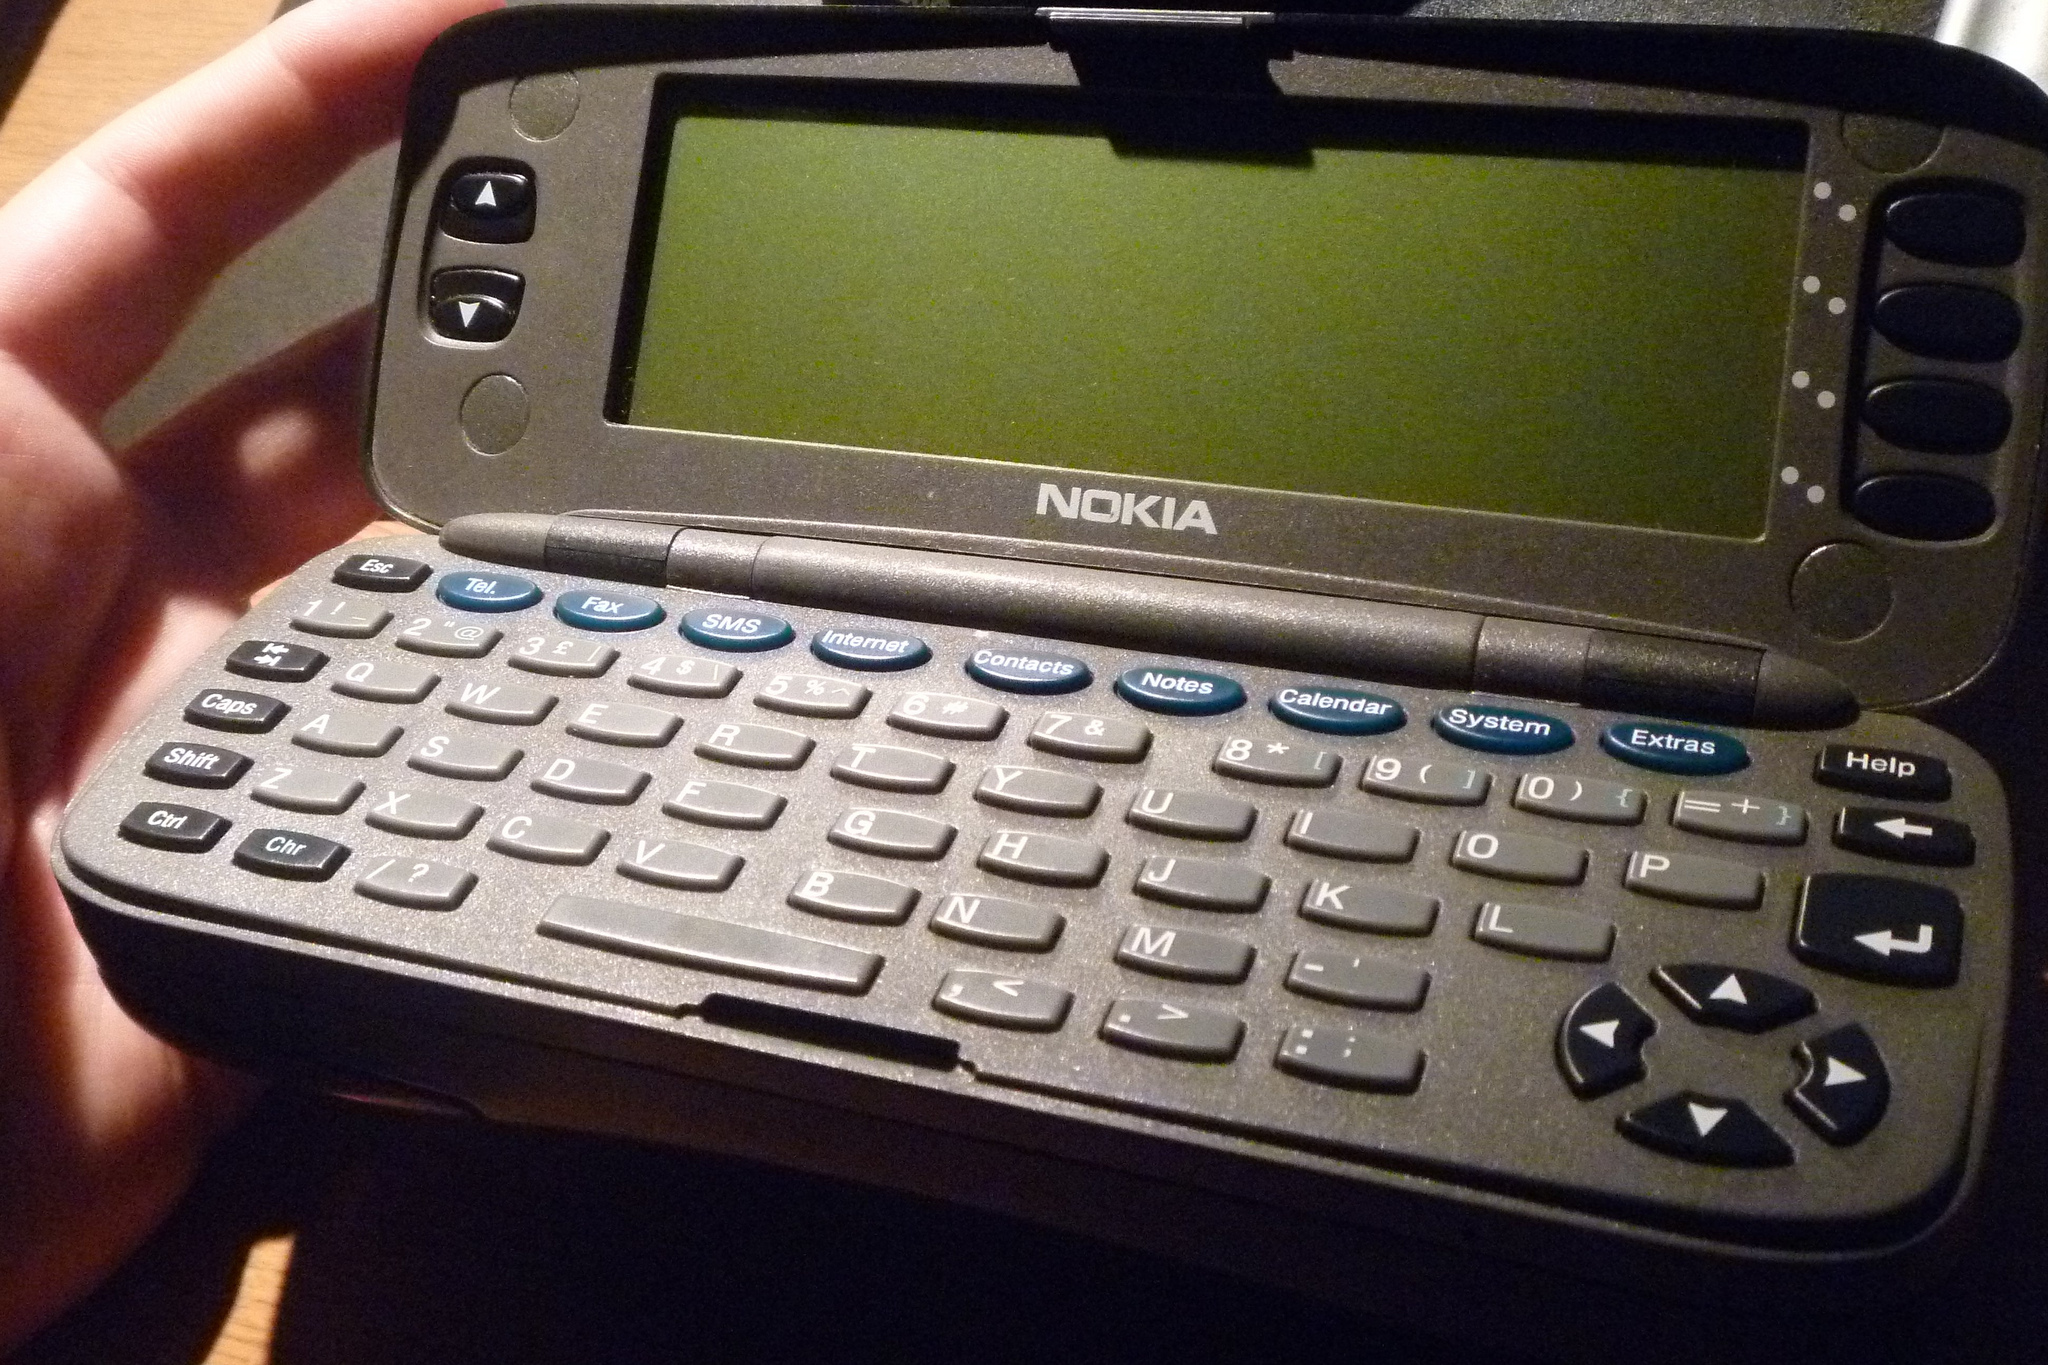 Nokia N9000 slider with a full physical keyboard